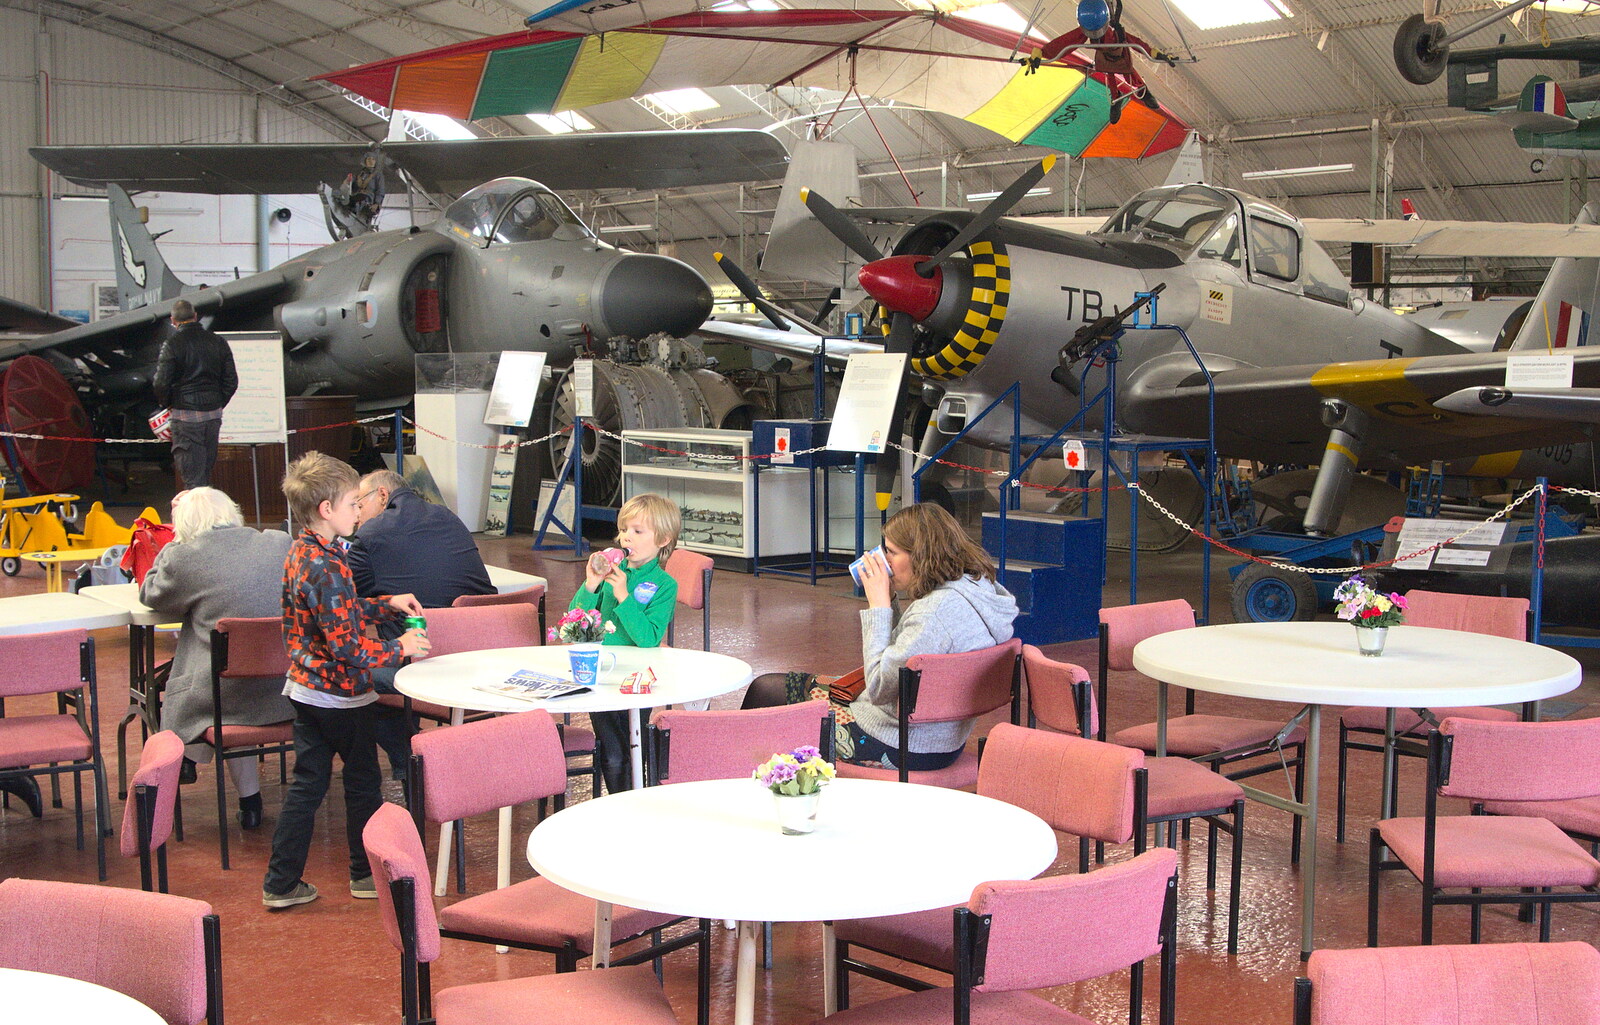 Time for a snack in front of the exhibits from Norfolk and Suffolk Aviation Museum, Flixton, Suffolk - 30th April 2017